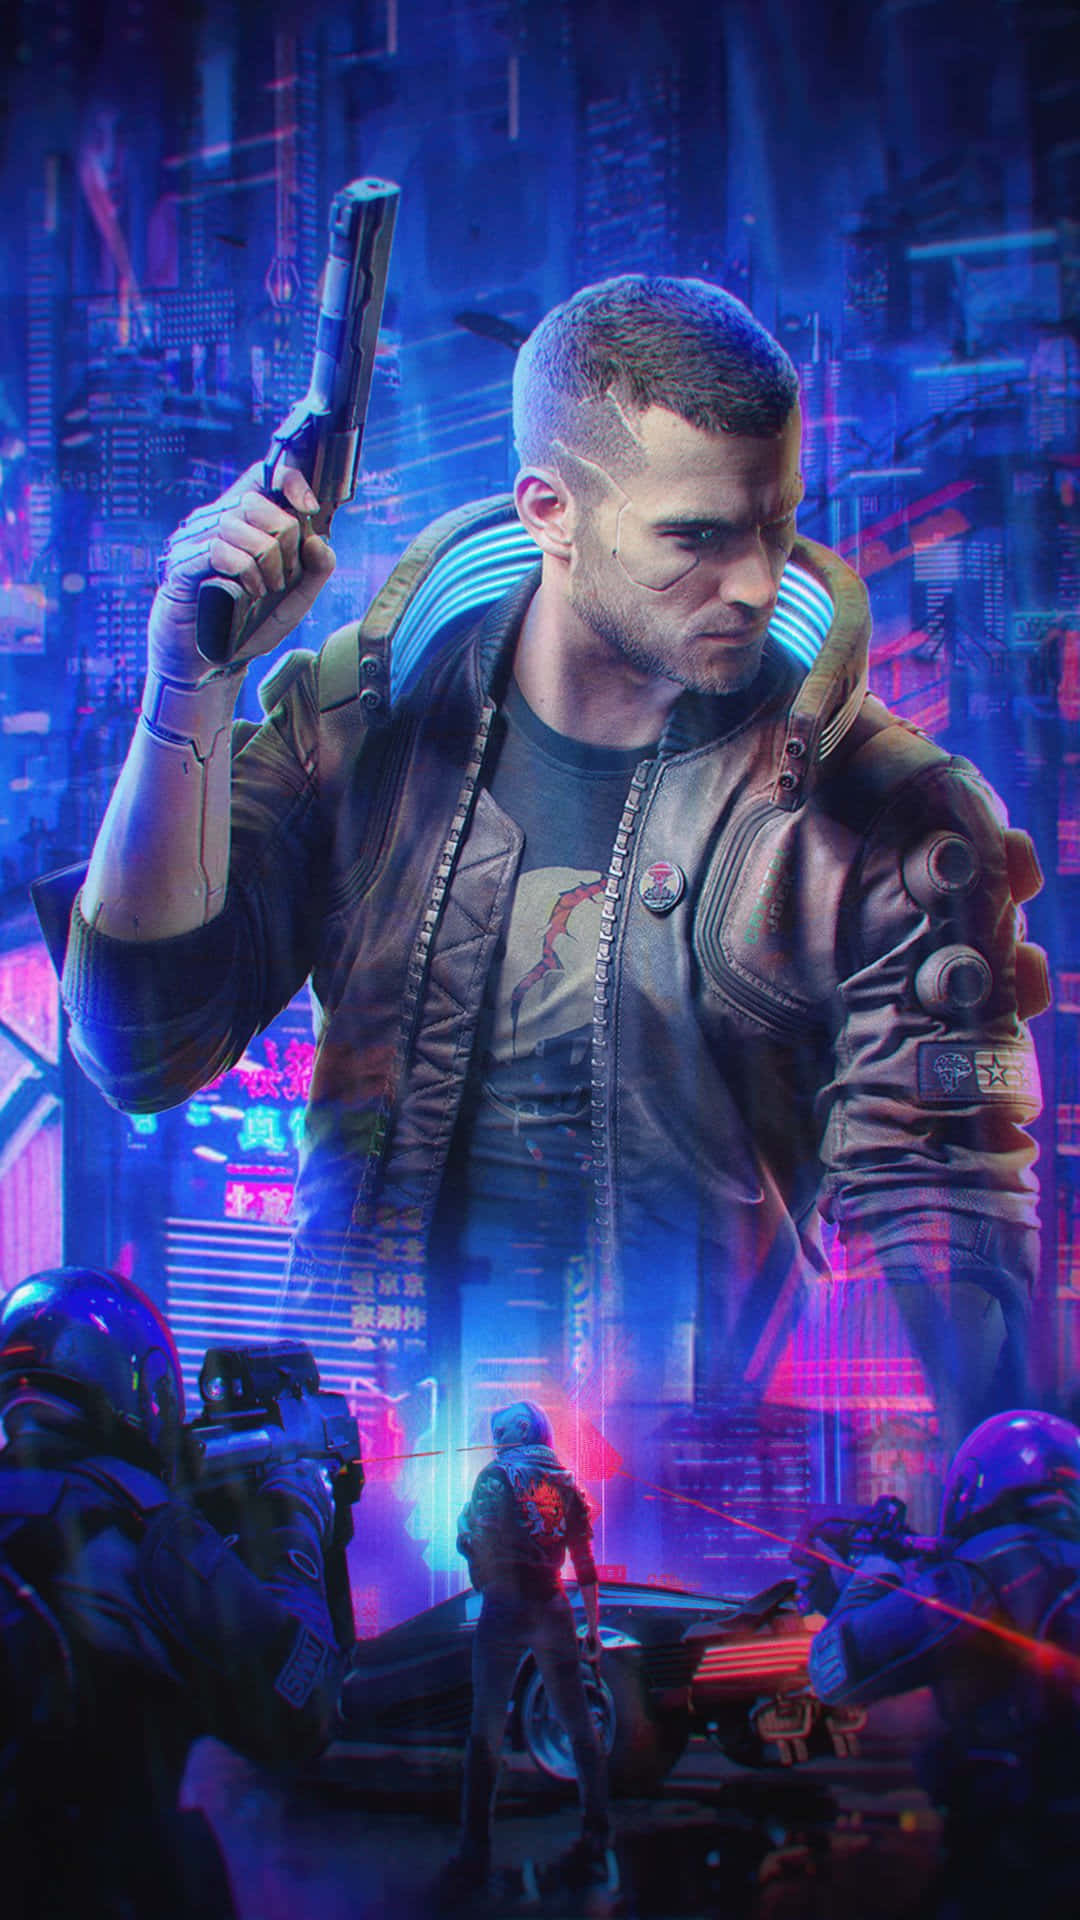 Lay your eyes on the future - the new iPhone Xs Max paired with the iconic Cyberpunk 2077!